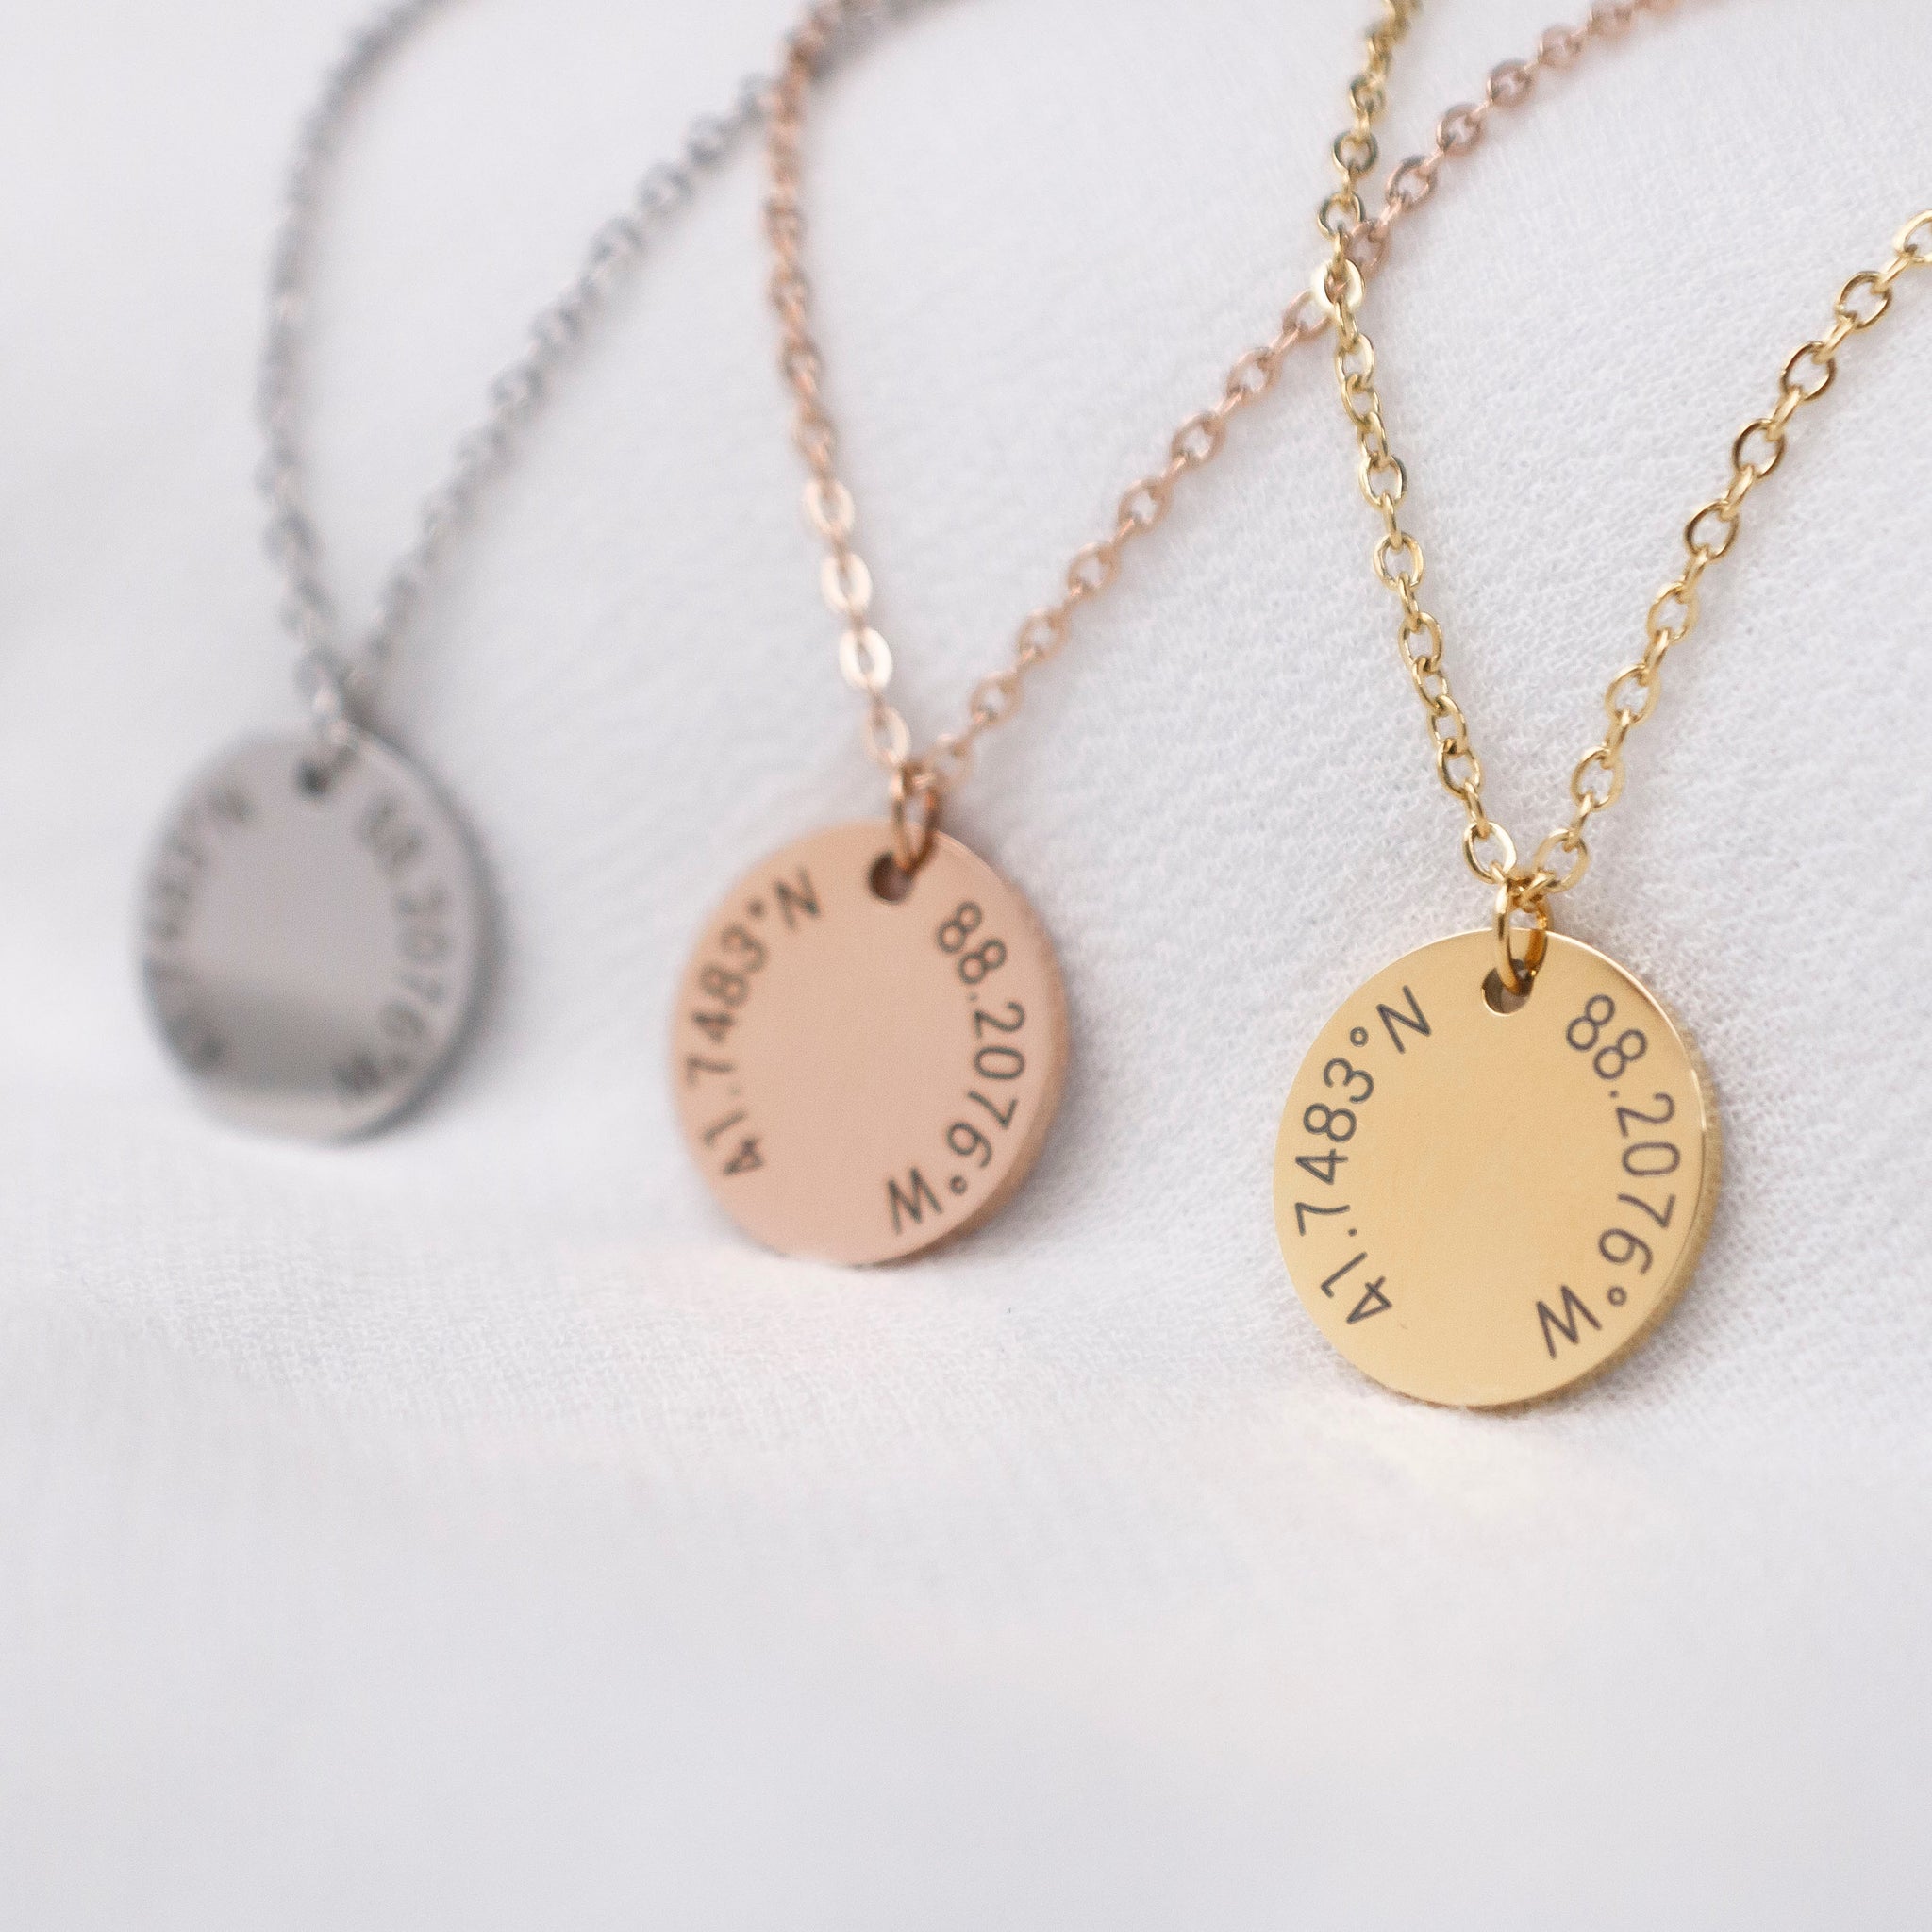 Coordinate Necklace for go away gift, gift for her, Graduation gift, fiancee, Latitude Longitude, gps coordinates gift